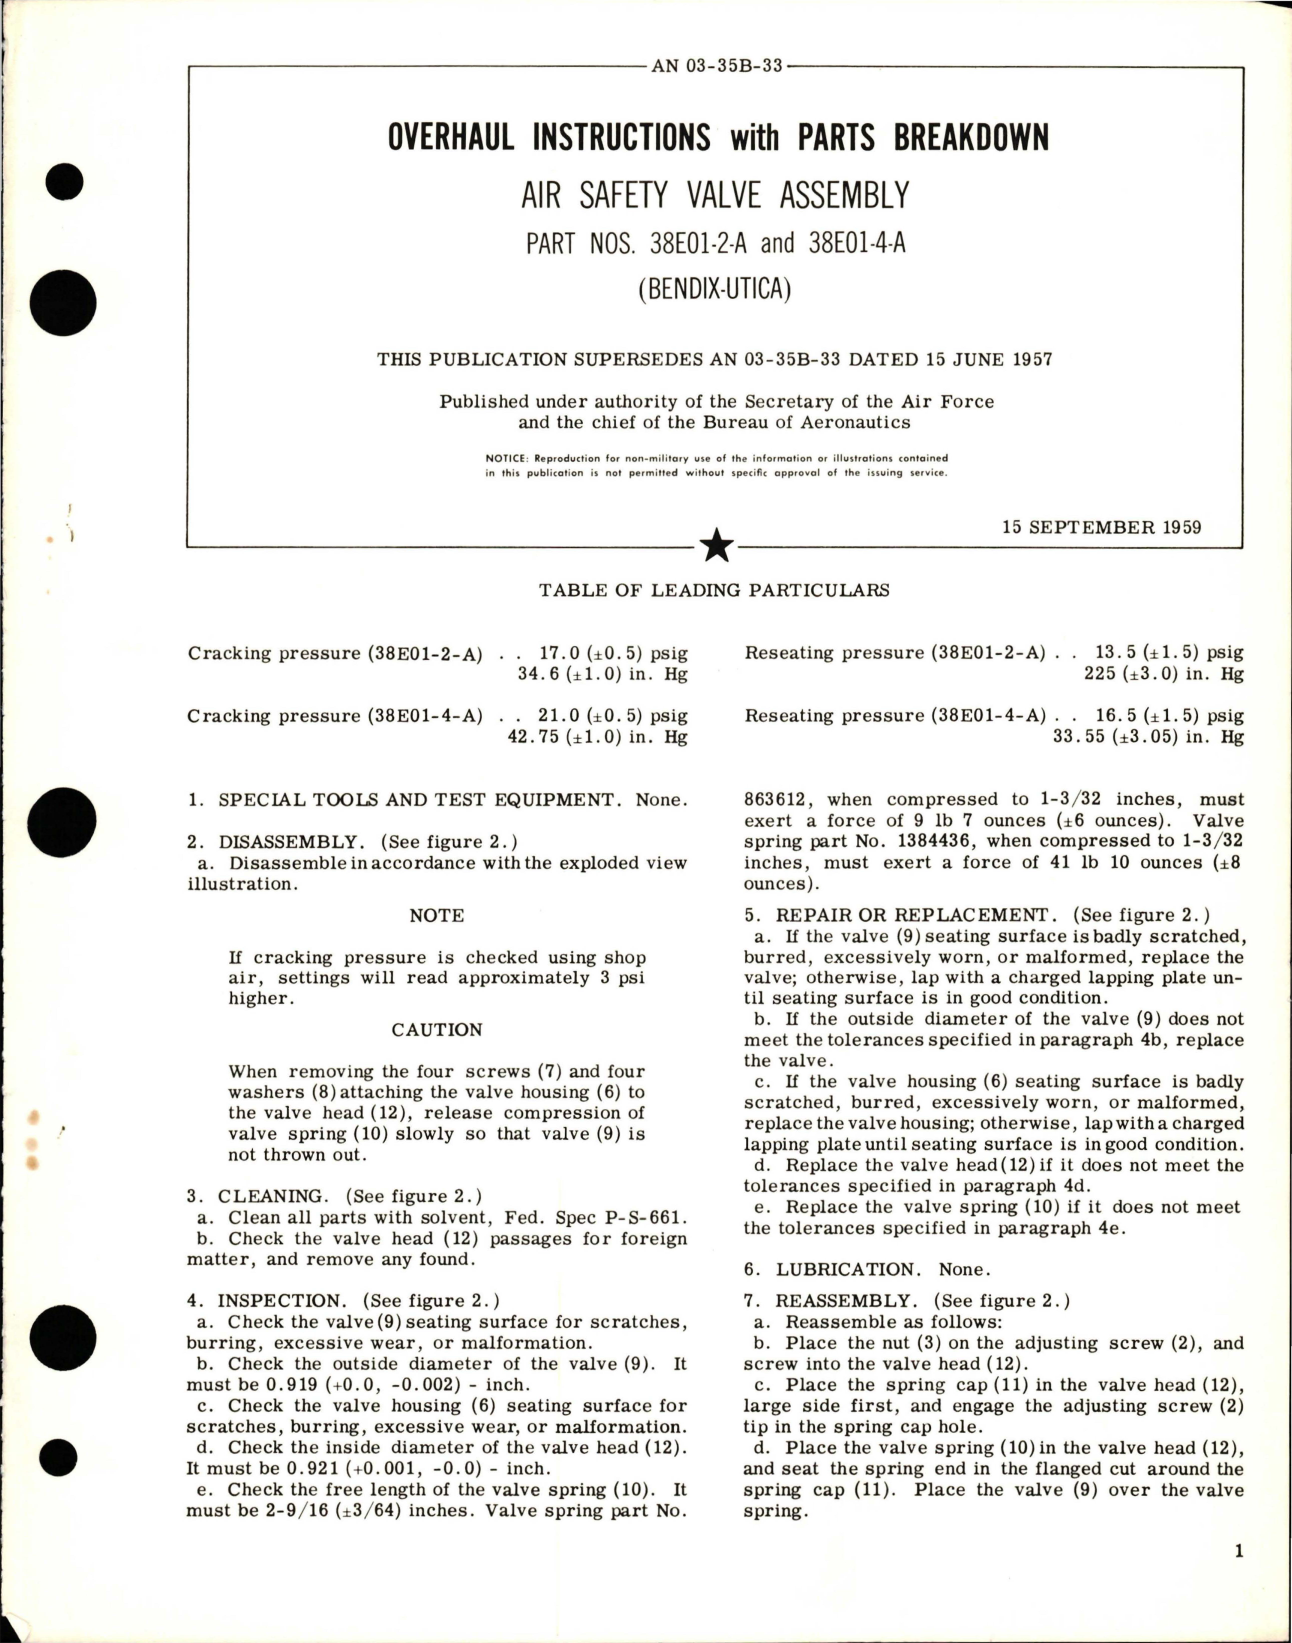 Sample page 1 from AirCorps Library document: Overhaul Instructions with Parts Breakdown for Air Safety Valve Assembly - Parts 38E01-2-A and 38E01-4-A